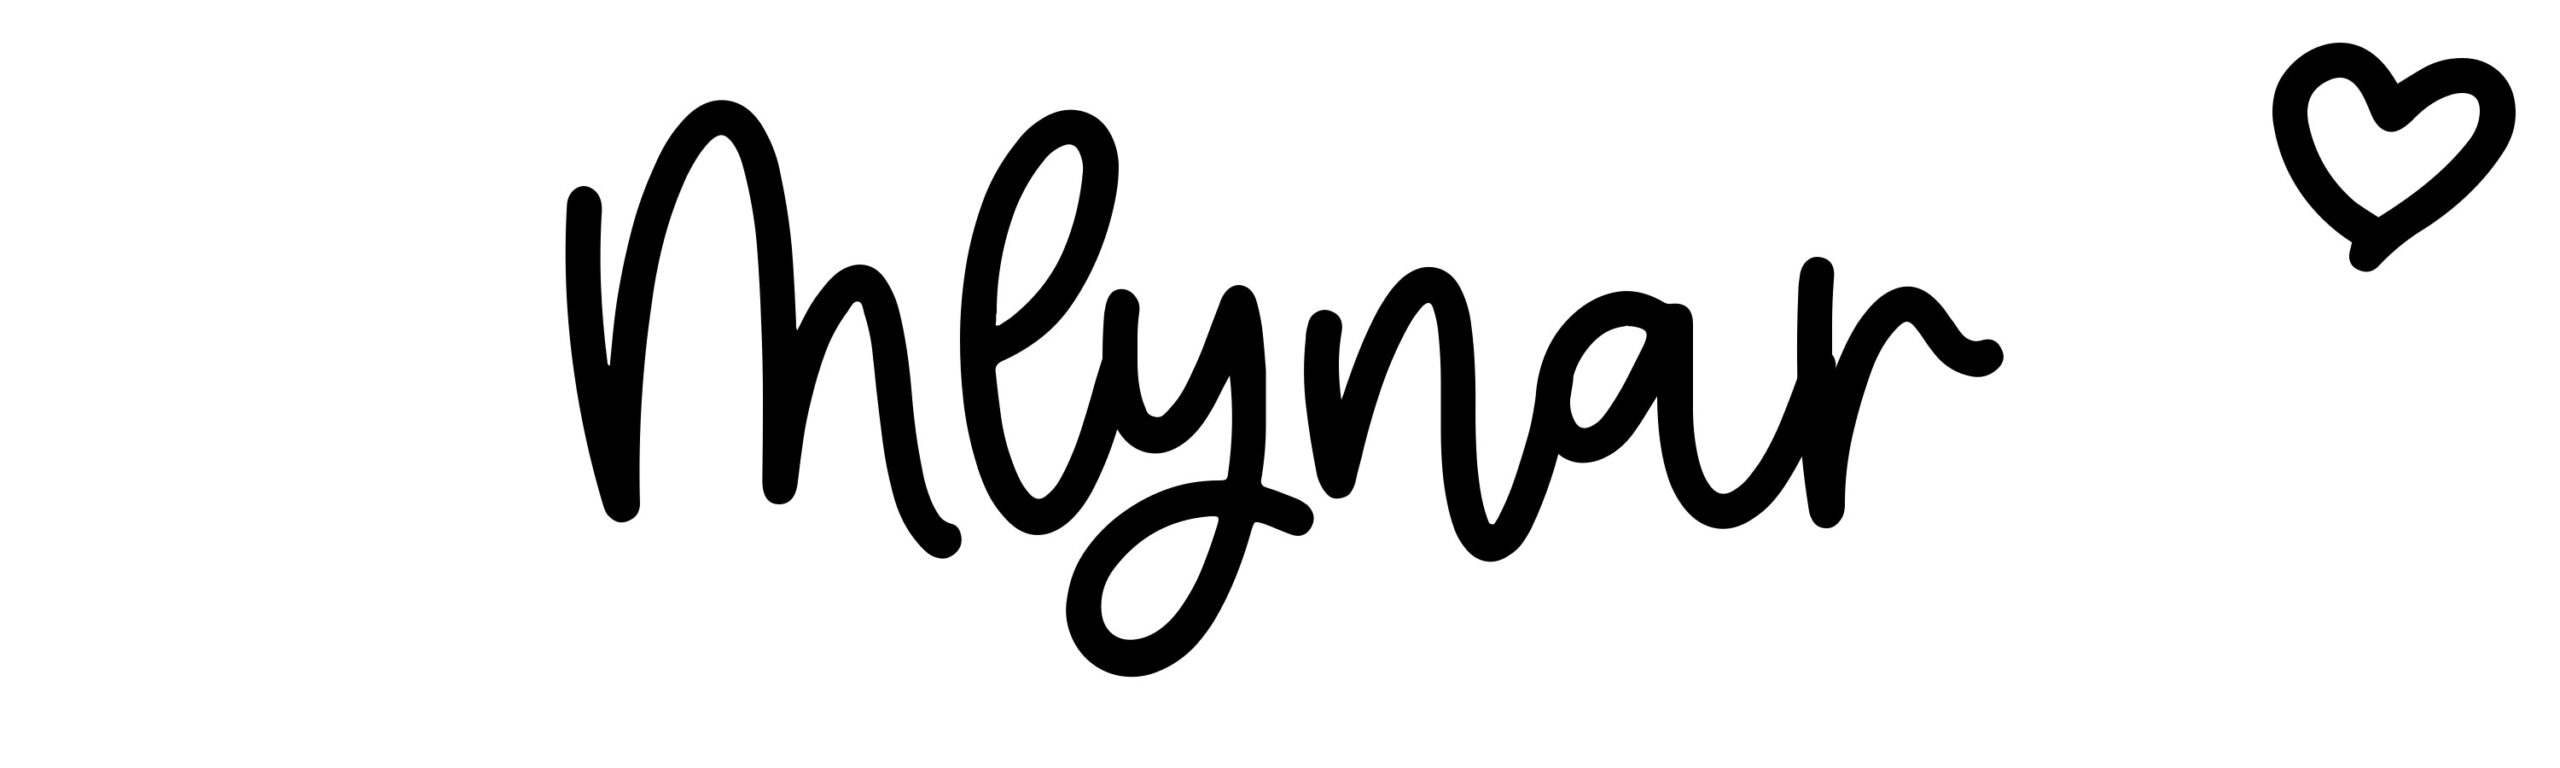 Mlynar - Name meaning, origin, variations and more